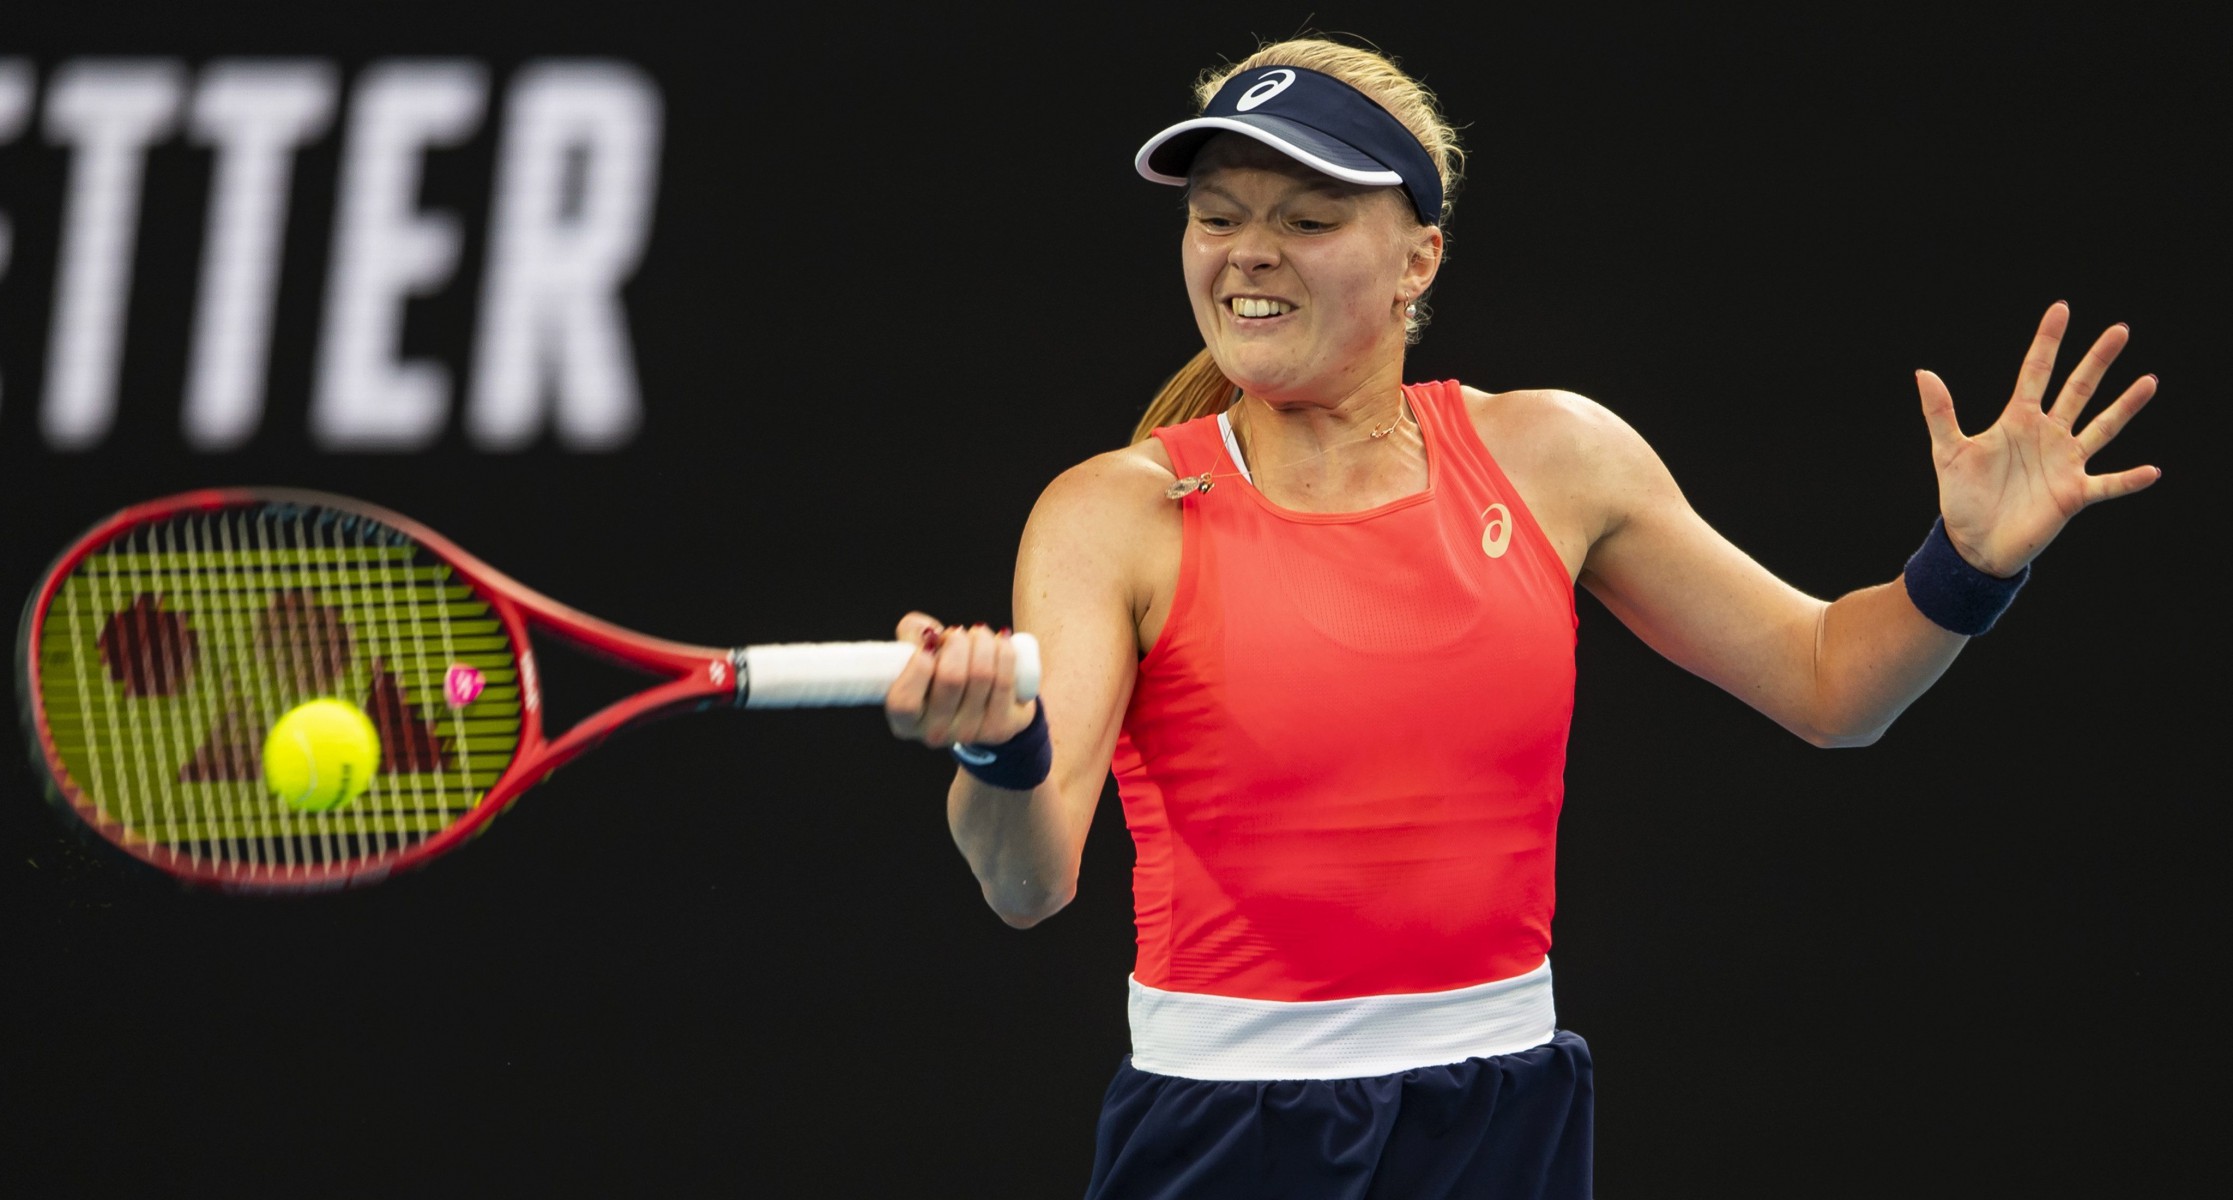 , Last British hope Harriet Dart exits Australian Open after being smashed by Simona Halep in shocking year for GB stars